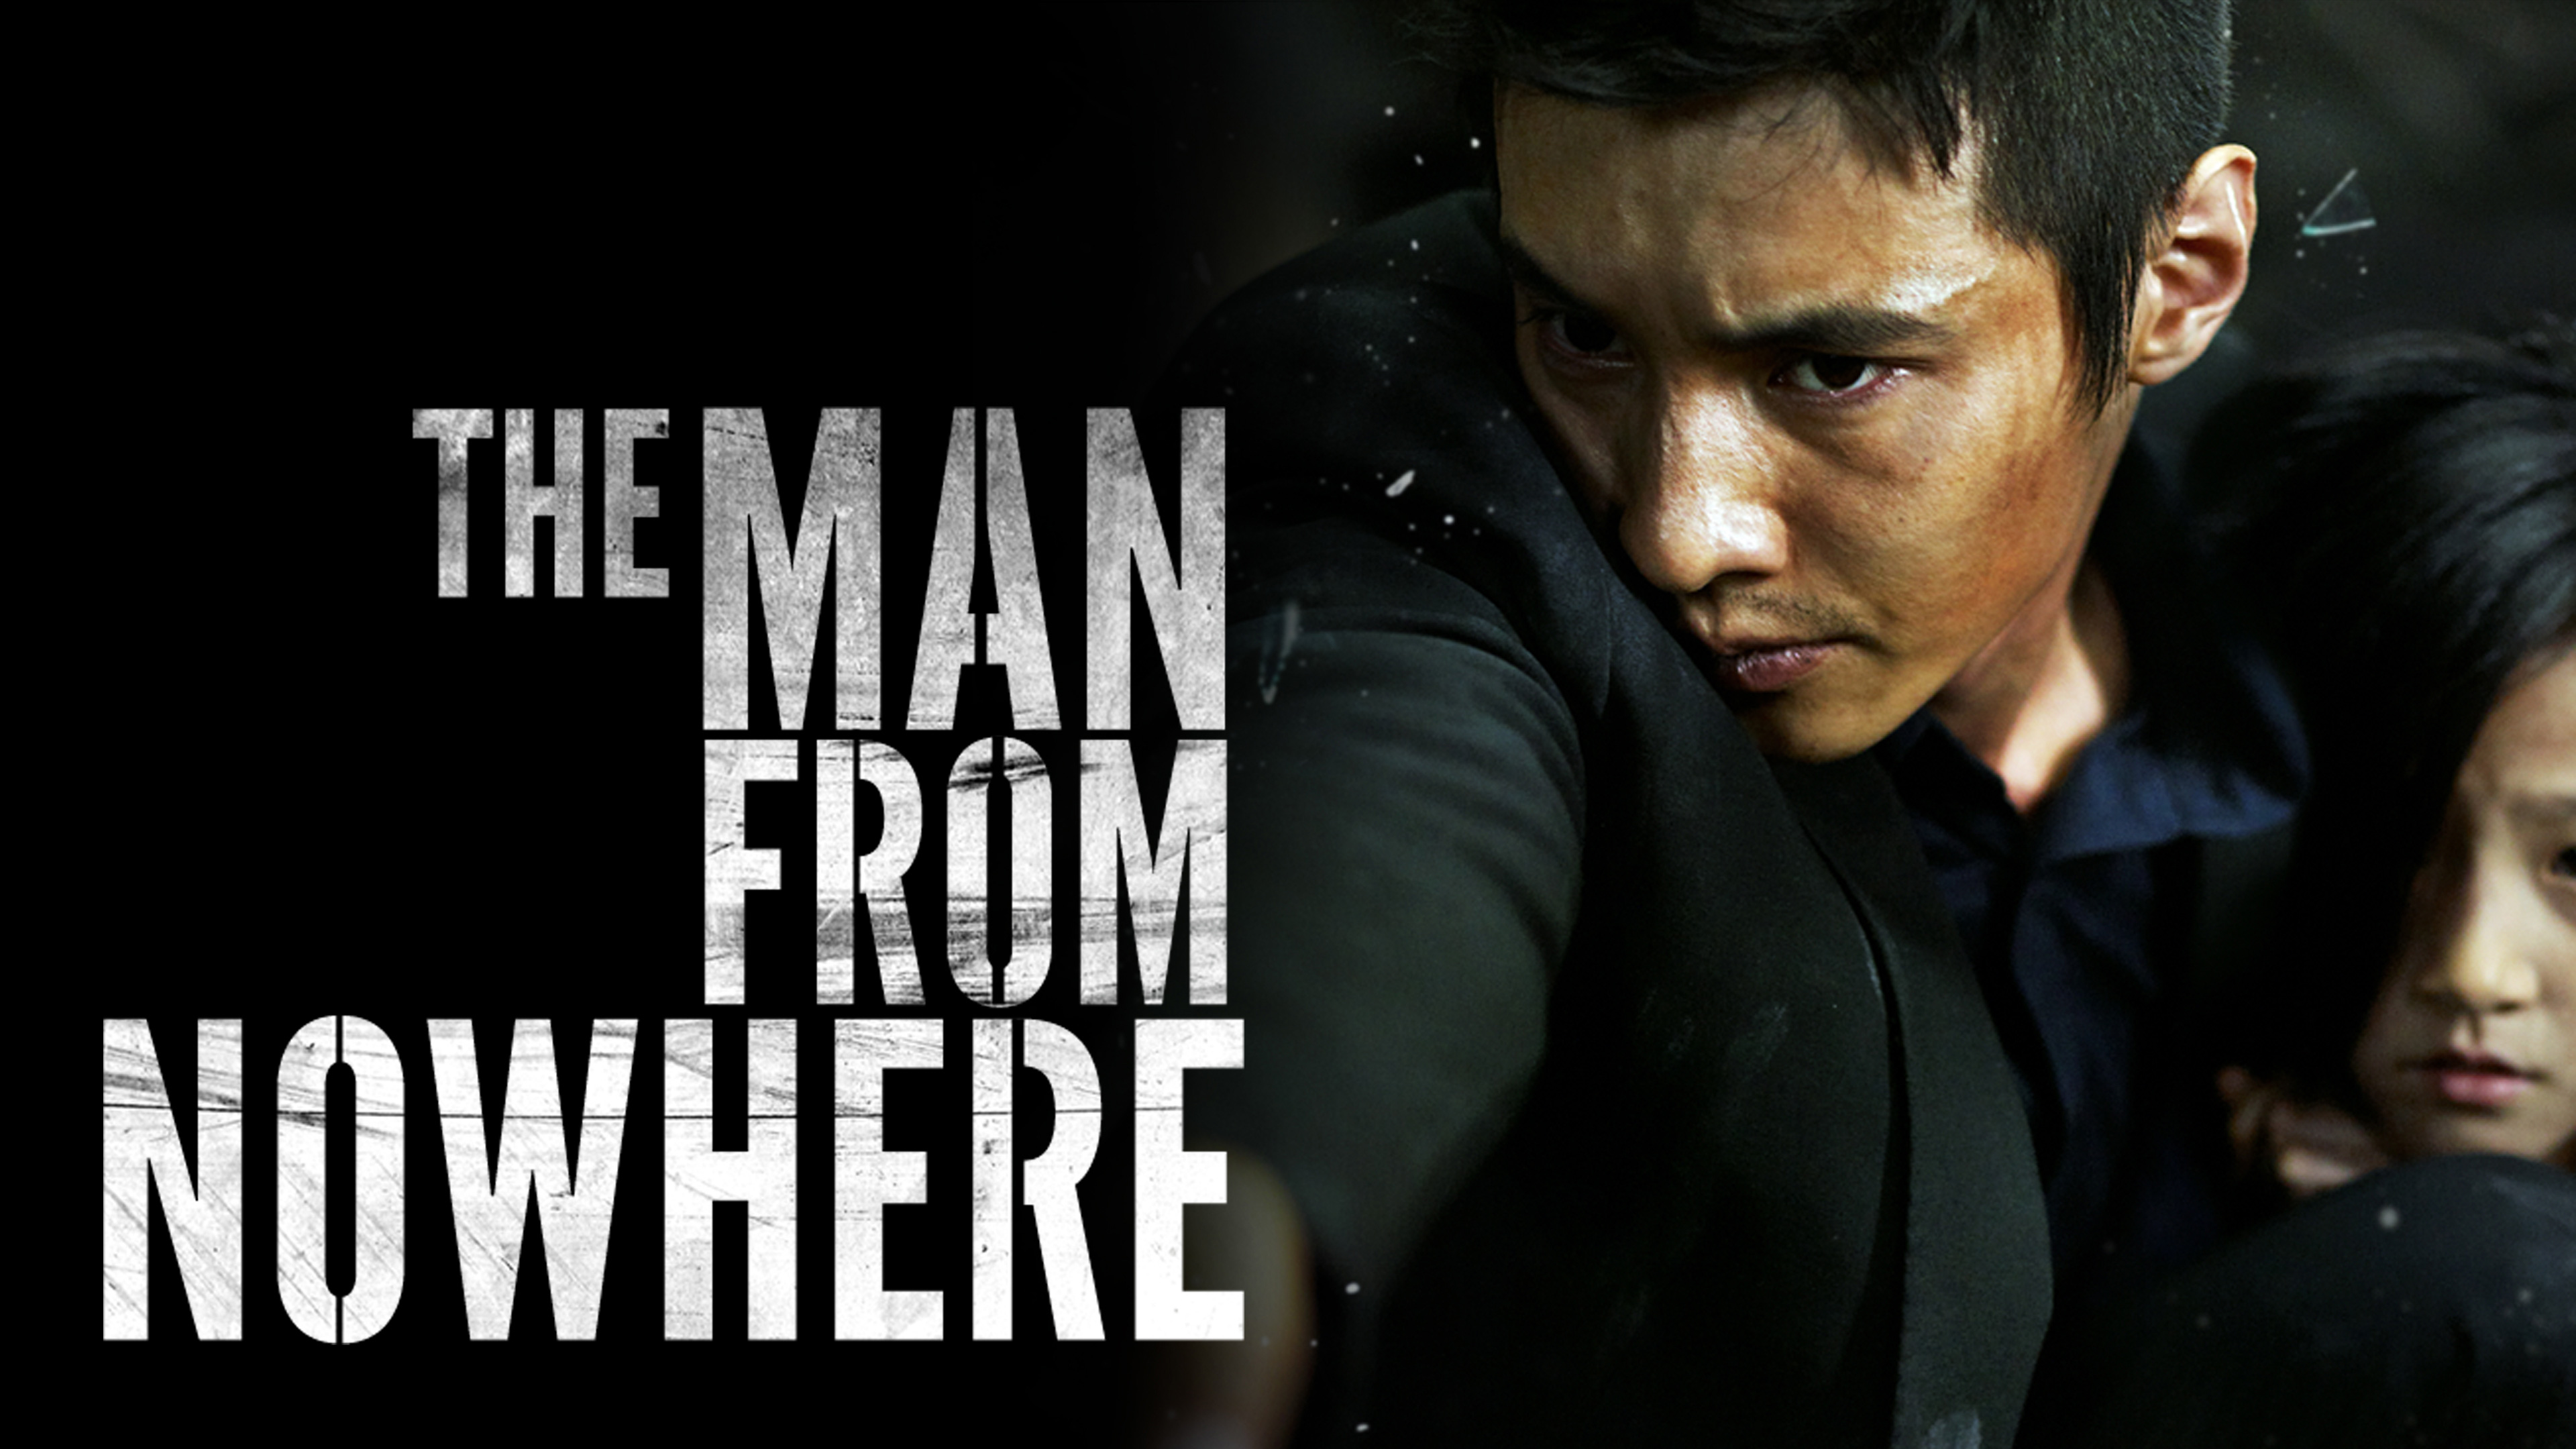 a man from nowhere eng sub